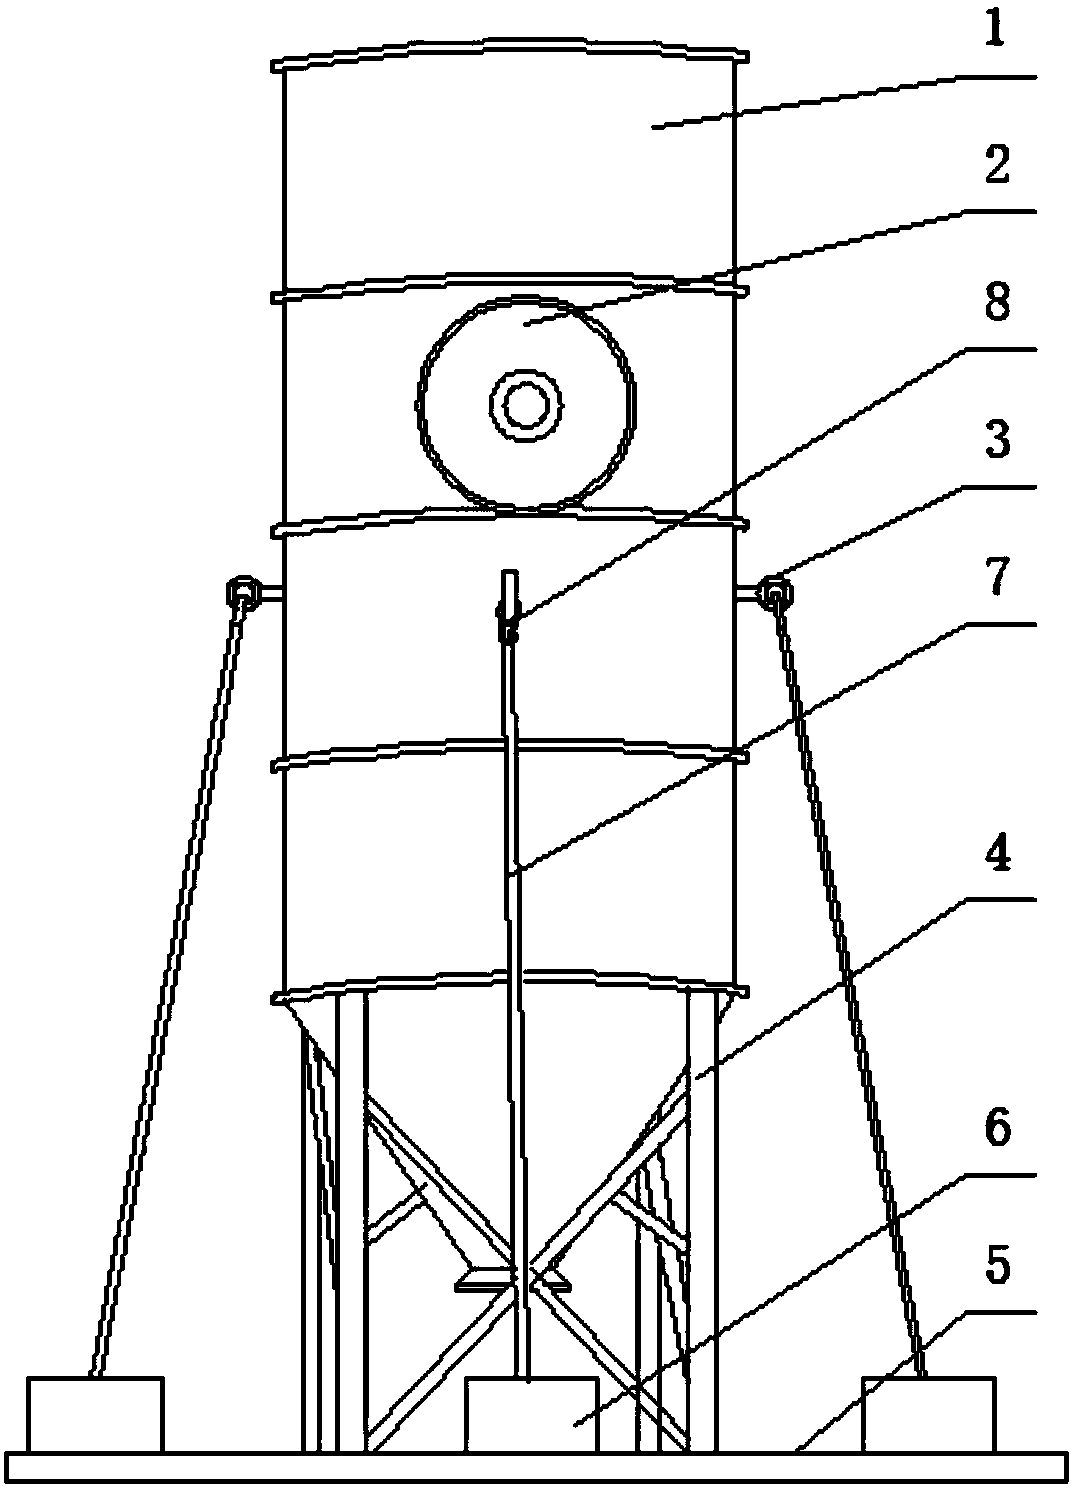 A cement tank with adjustable balance